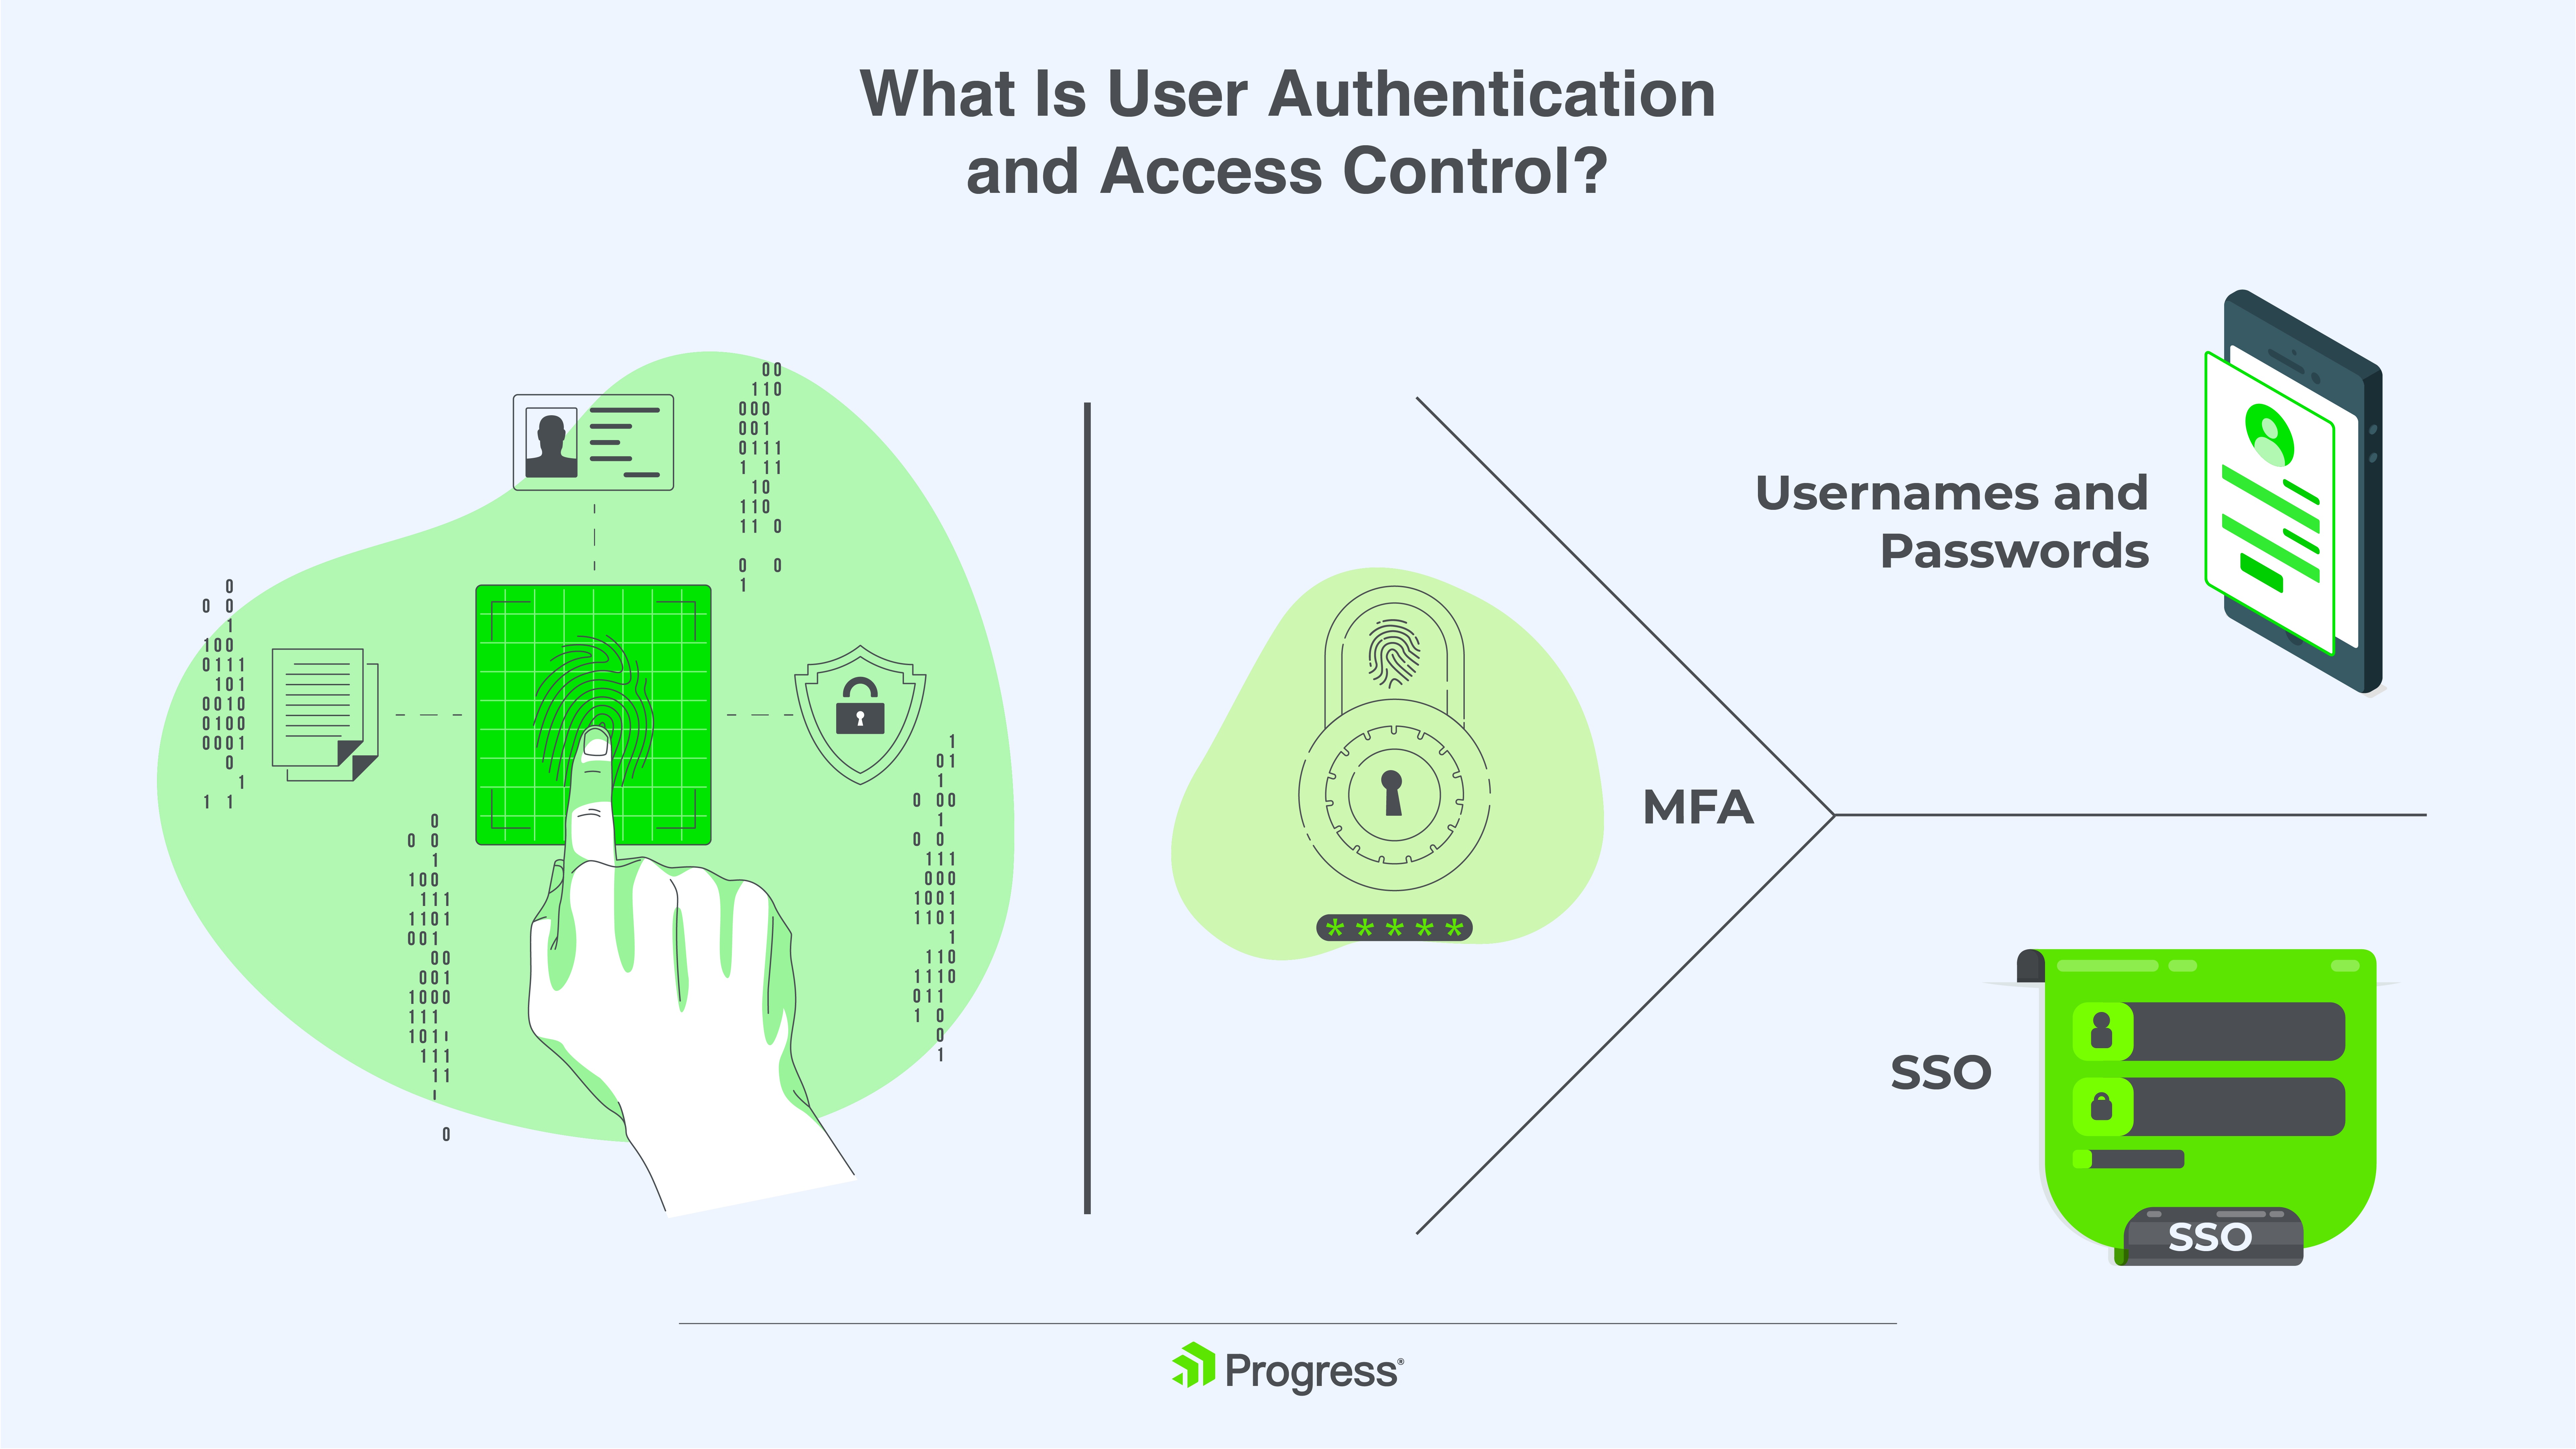 What Is User Authentication and Access Control?